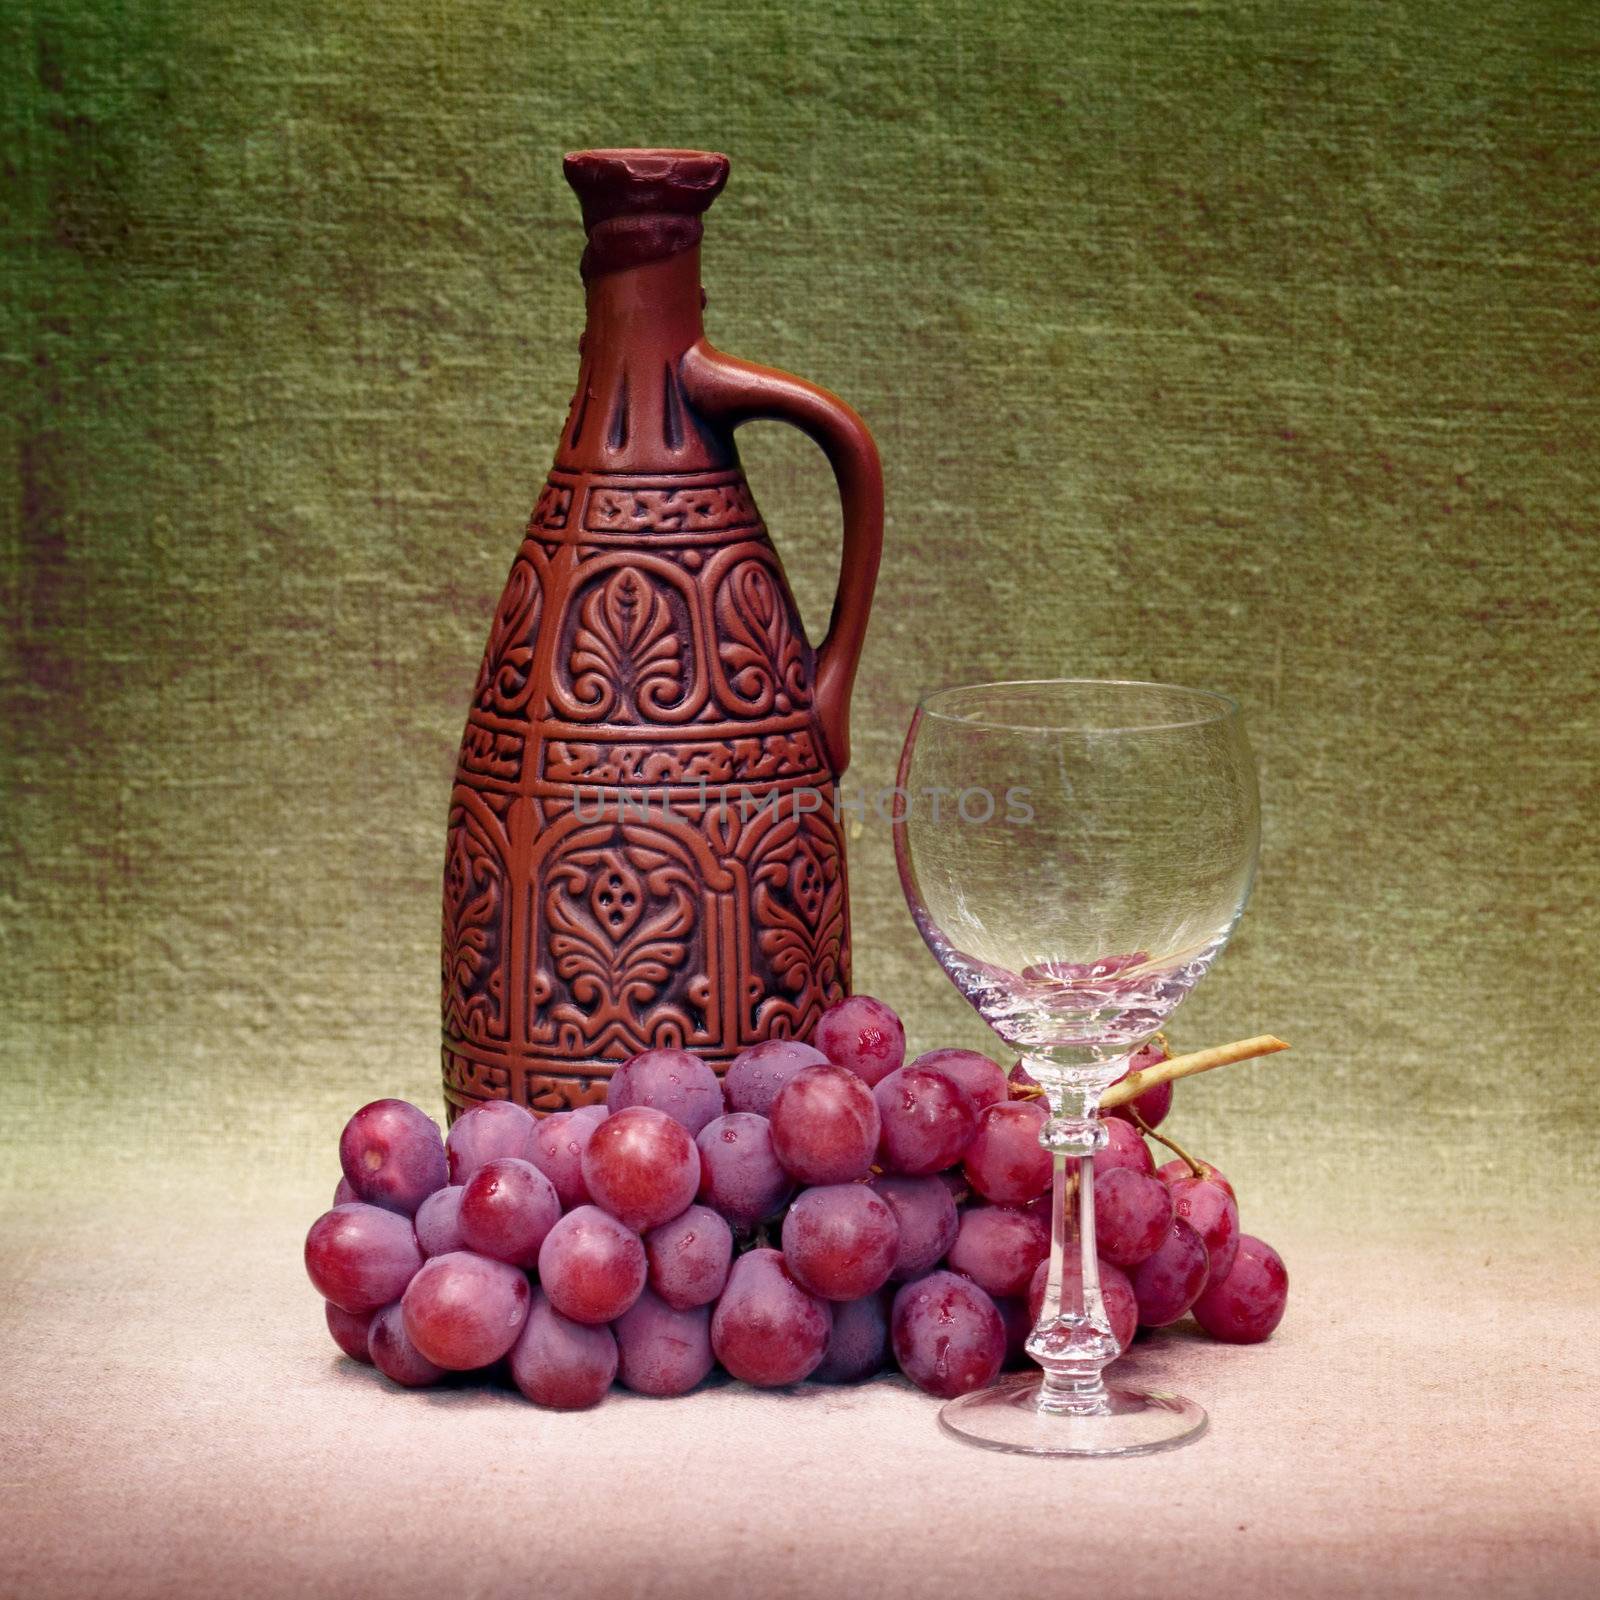 Still-life with a clay large bottle, a glass and grapes against a canvas